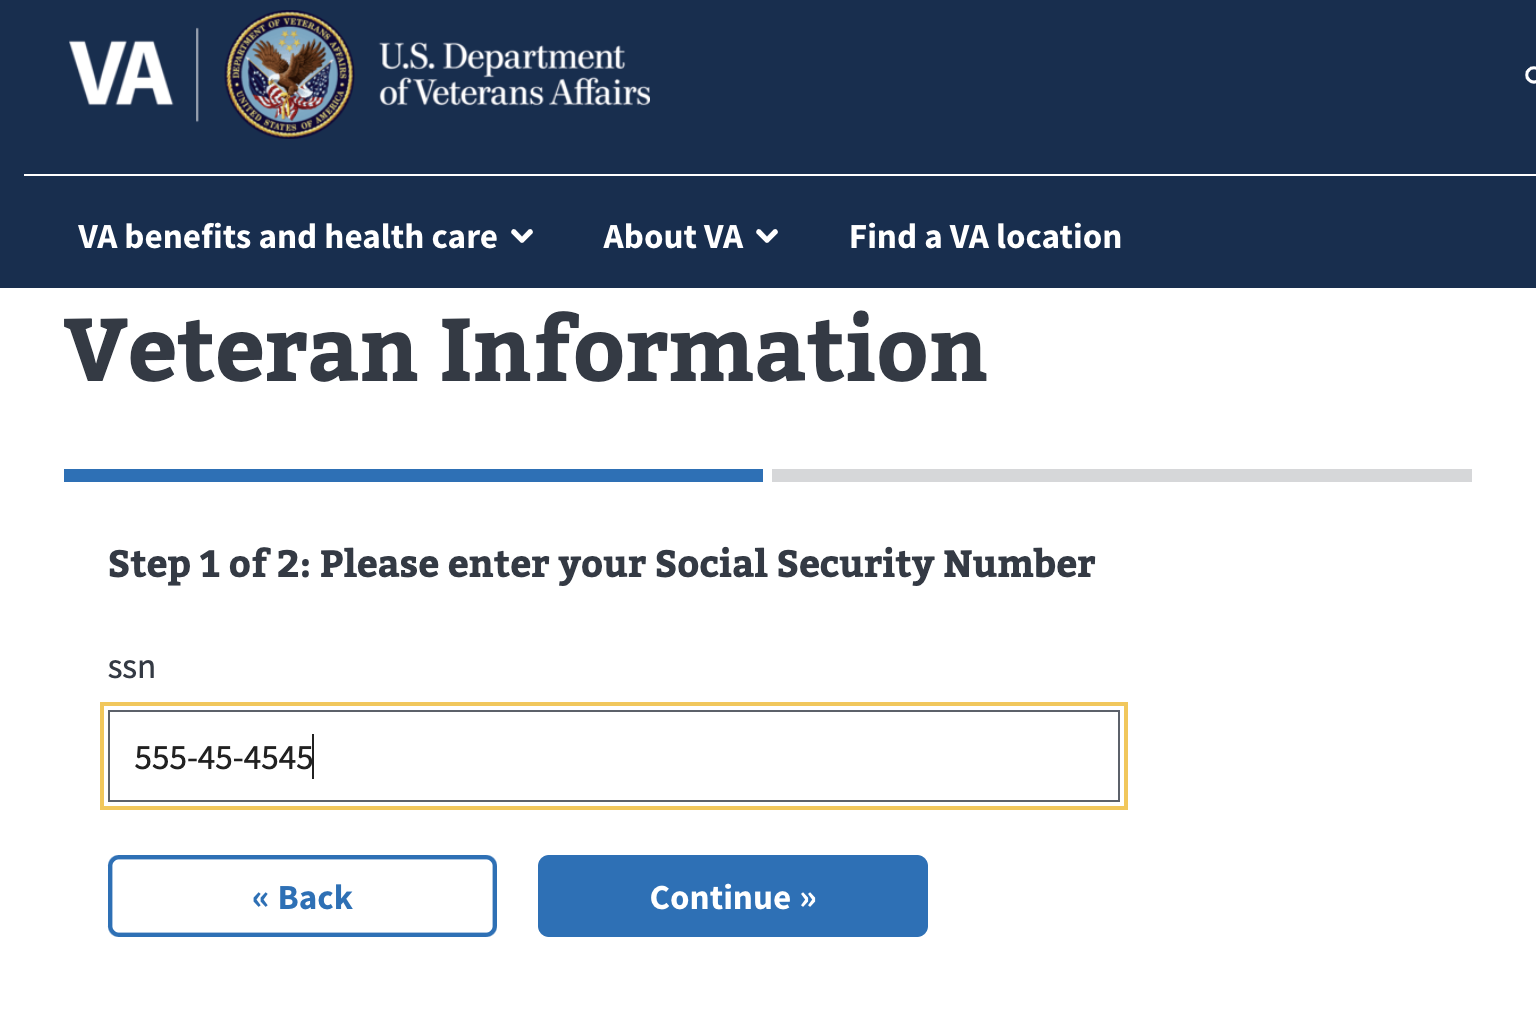 Screen shot of a Veteran Information form with Step 1 of 2, Please enter your Social Security Number, followed by a field allowing entry of ssn numbers and dashes, completed with 555-45-4545